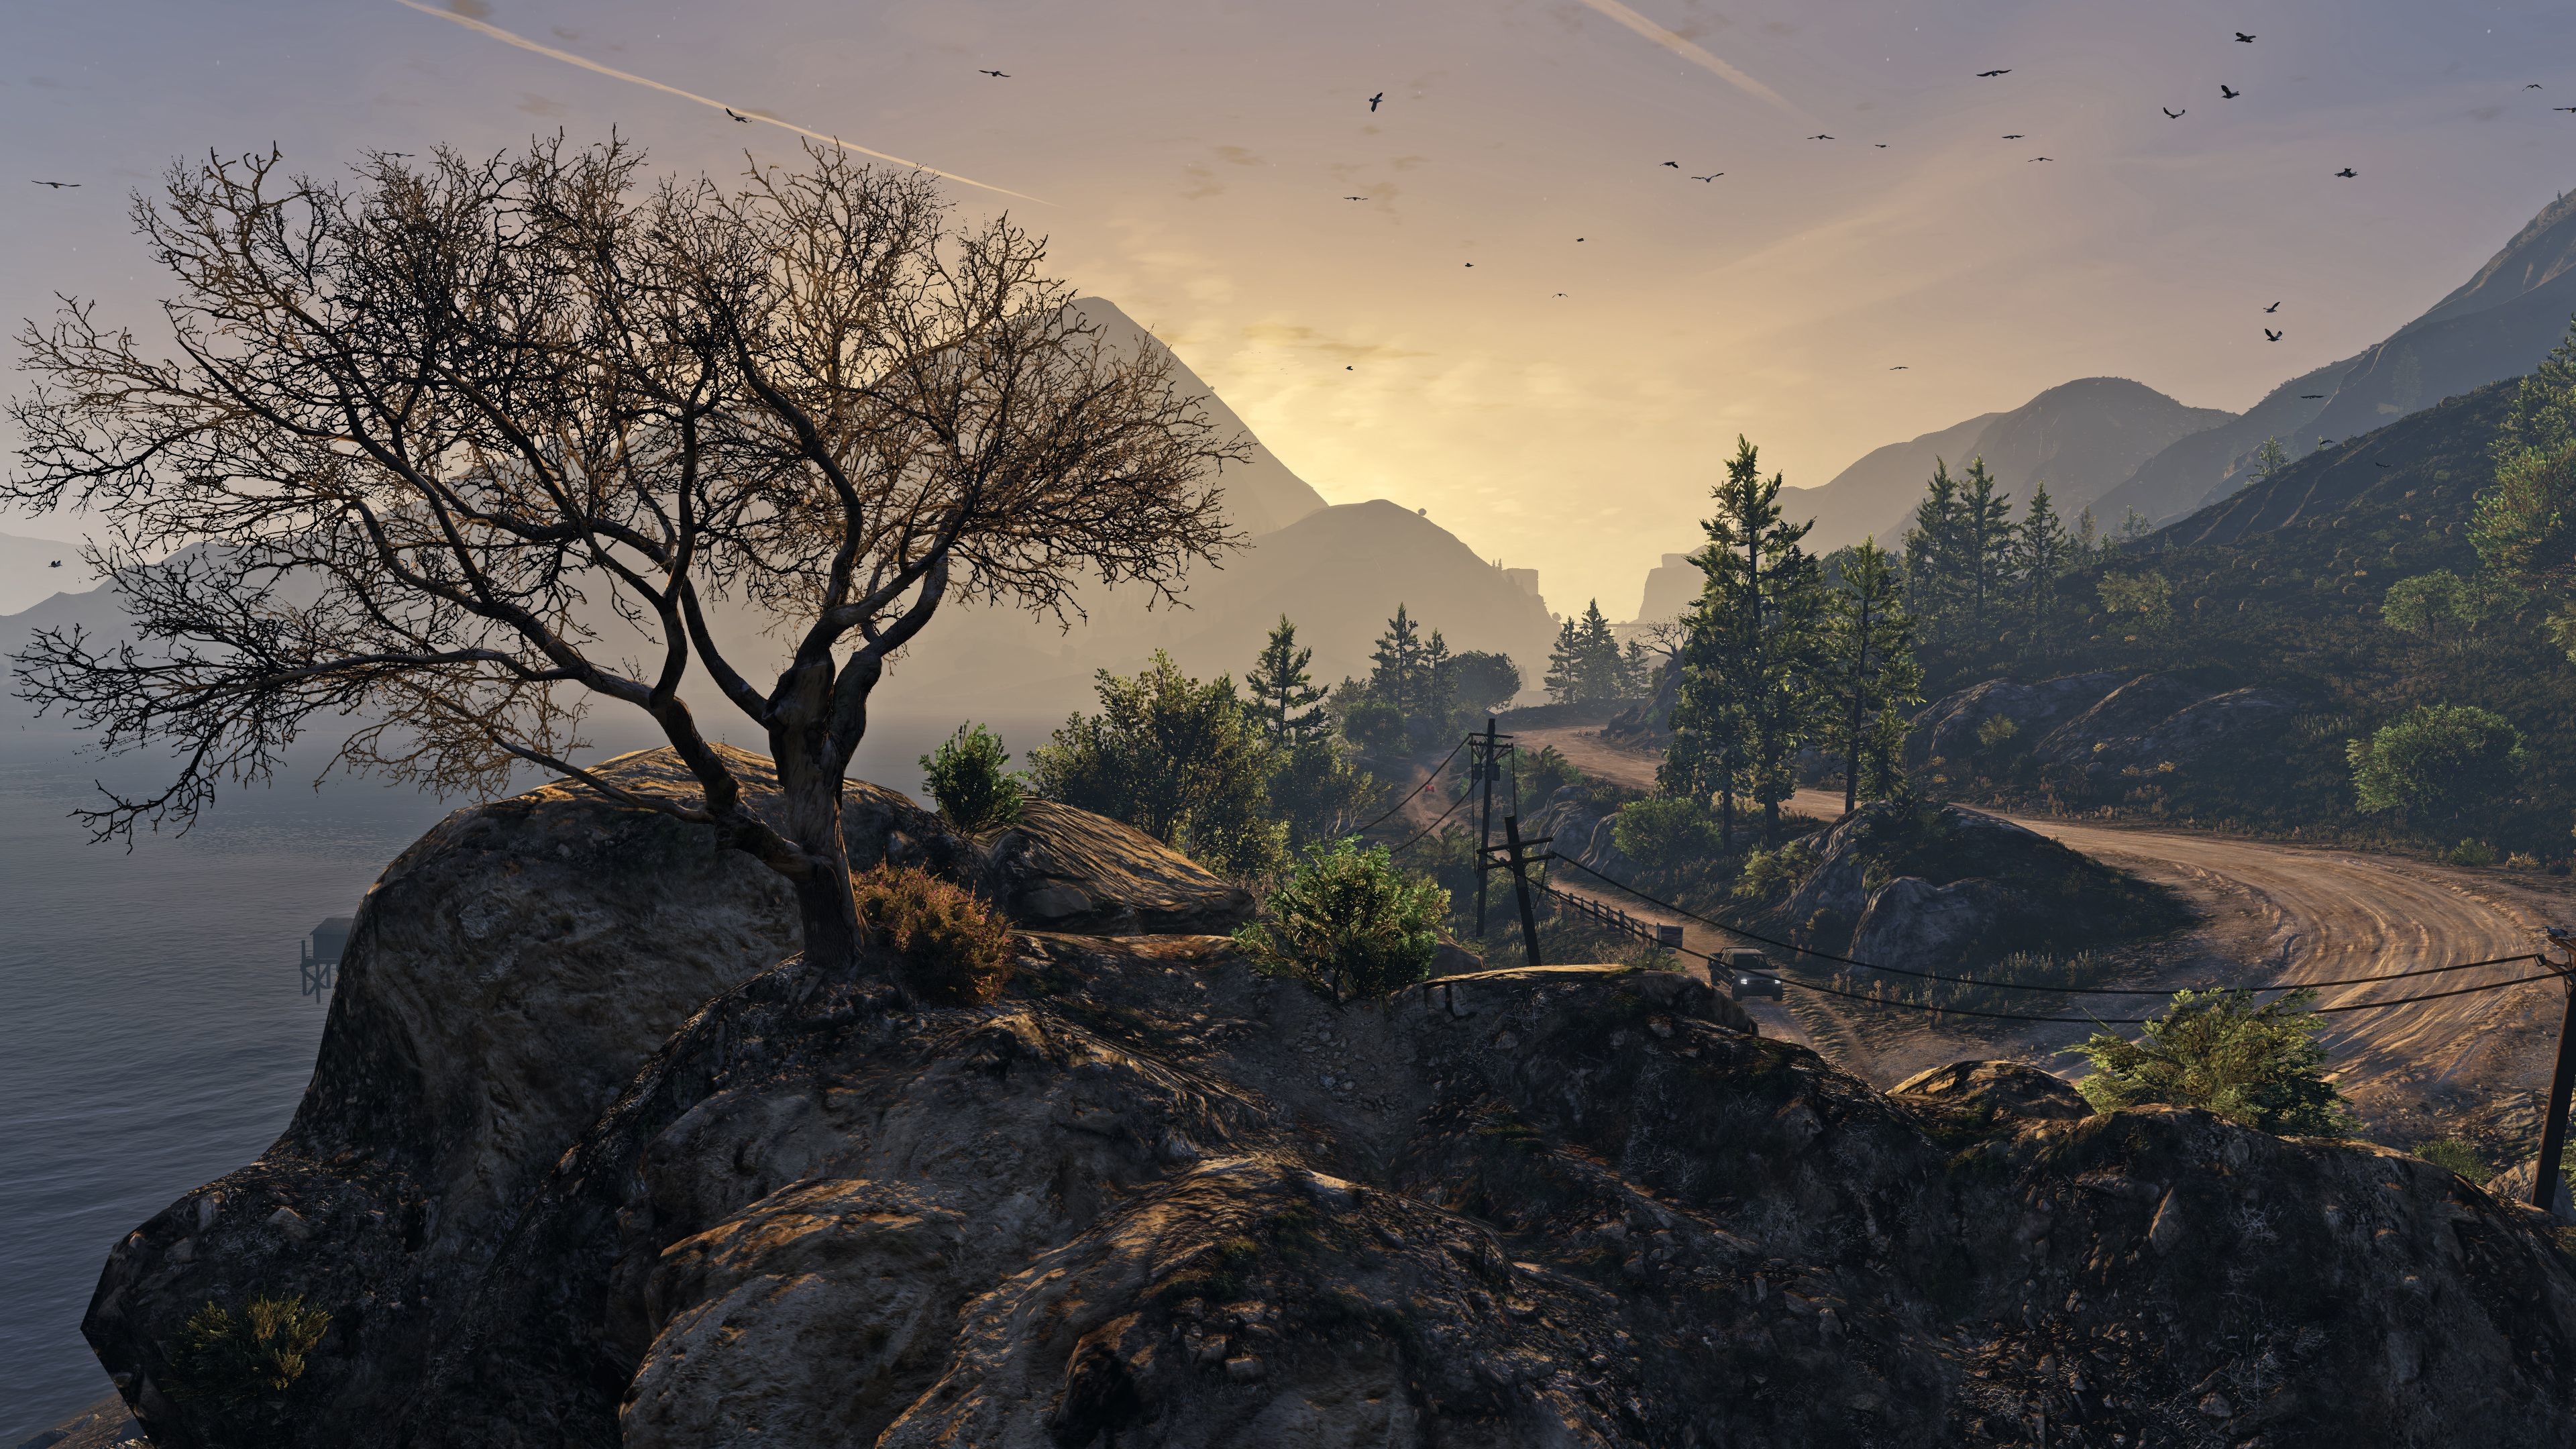 3840x2160 Landscape Wallpaper for Windows 10 Beautiful 484 Grand theft Auto V Hd  Wallpapers Inspiration Of Landscape